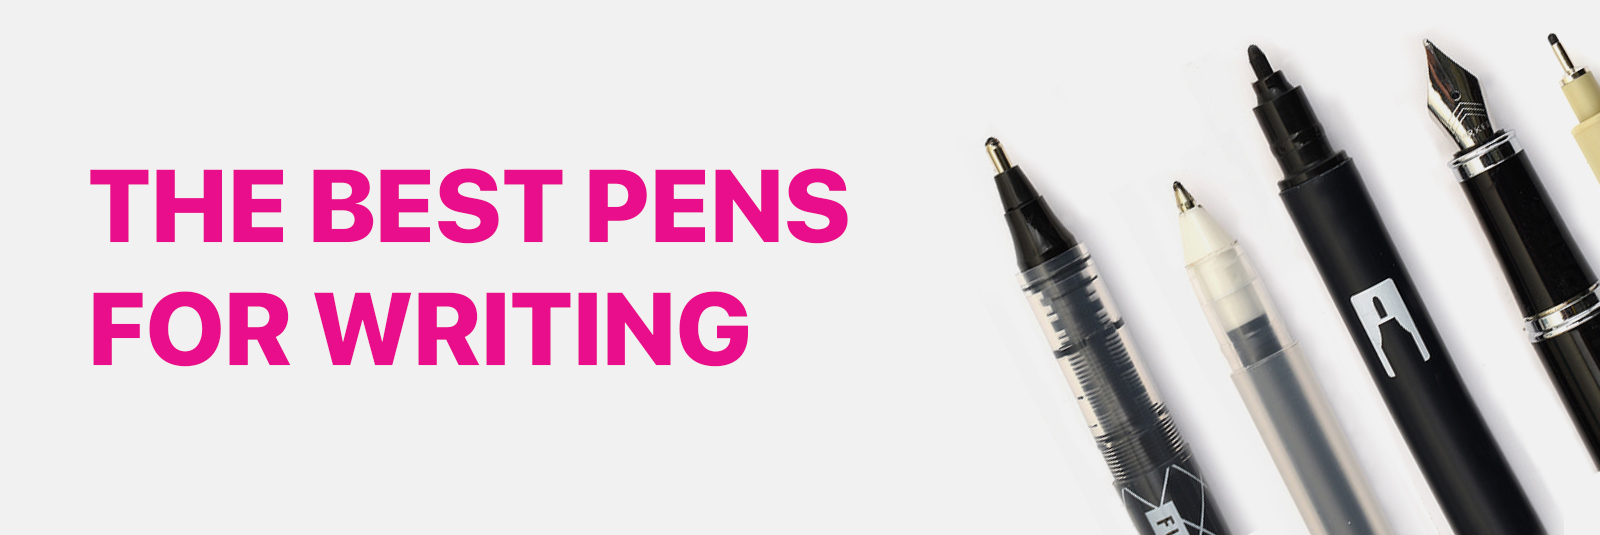 The Best Pens For Writing